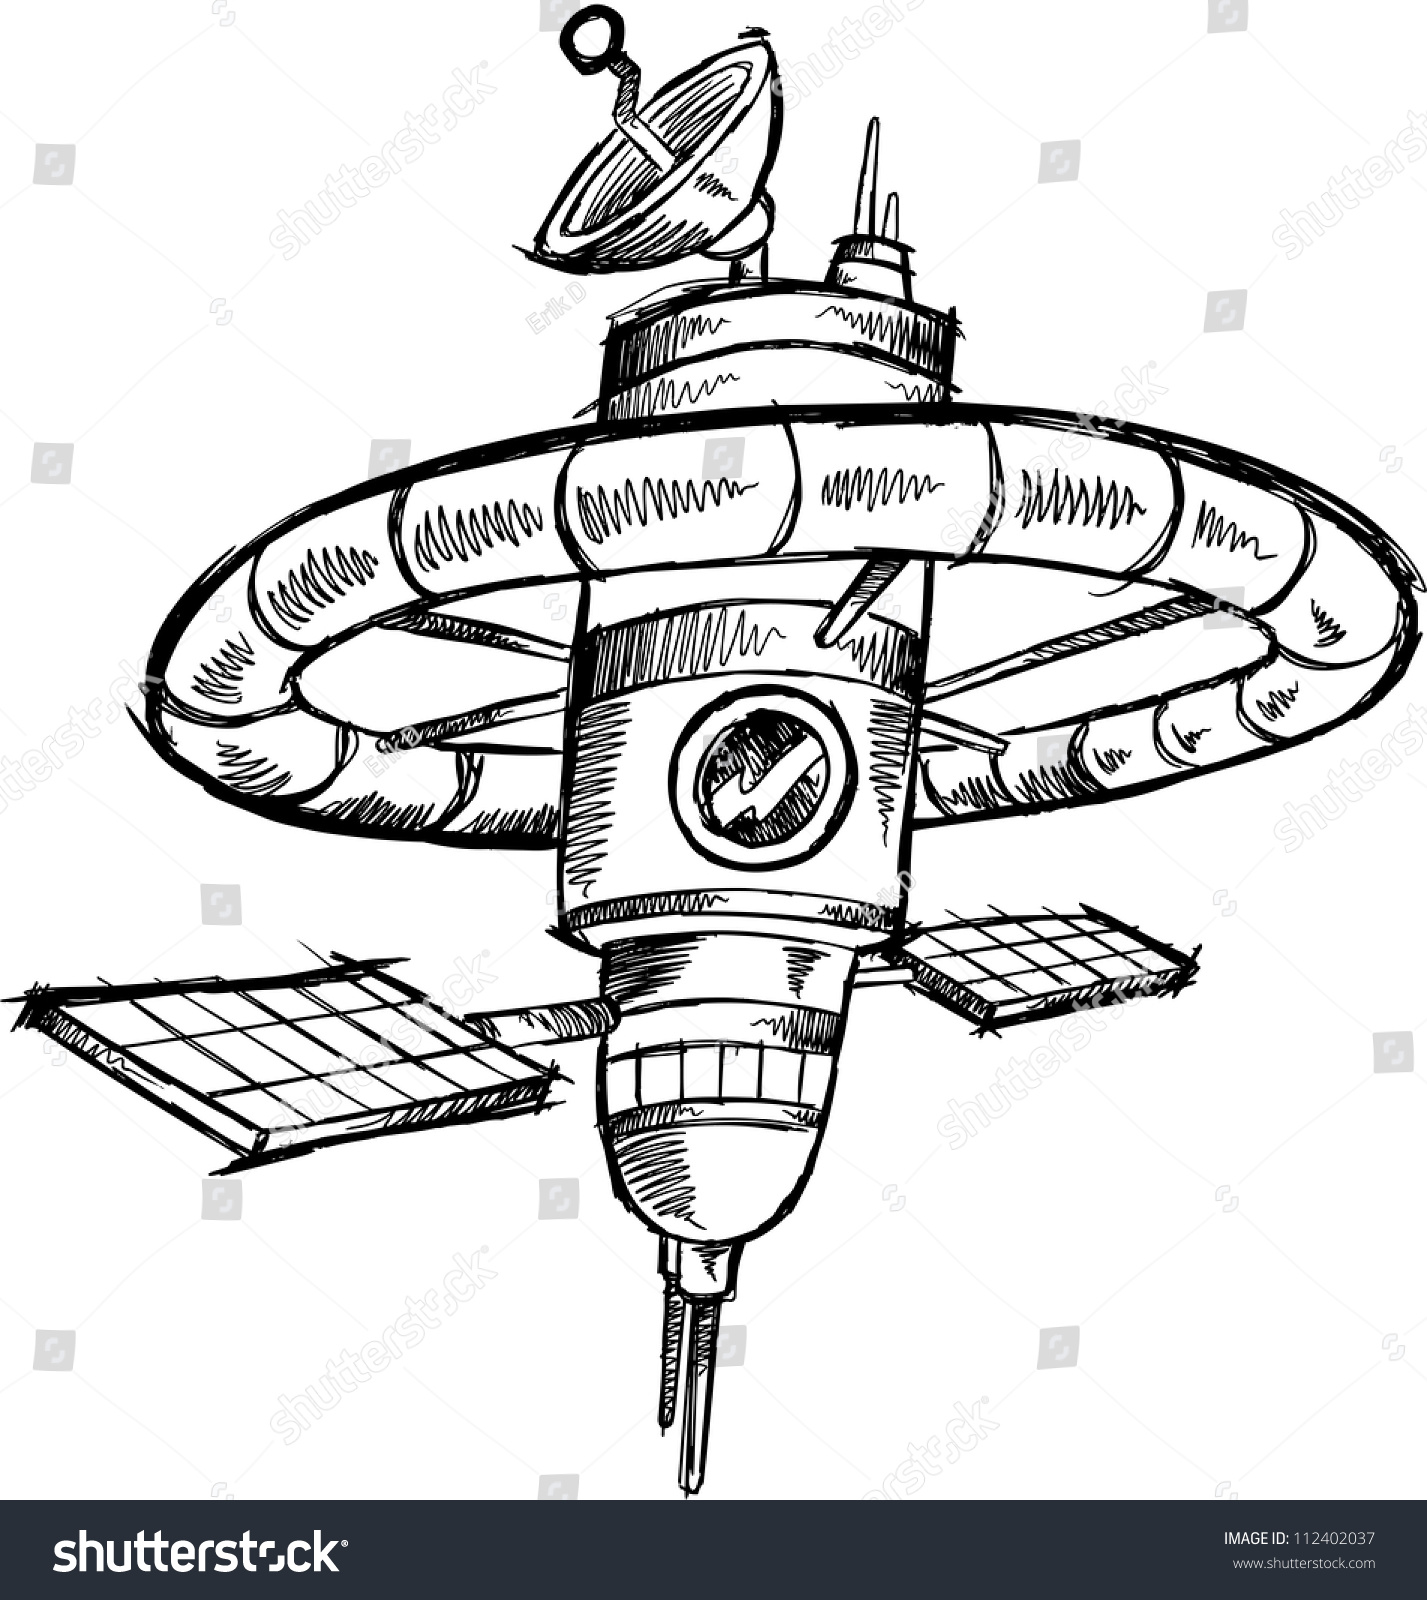 space station clip art - photo #32